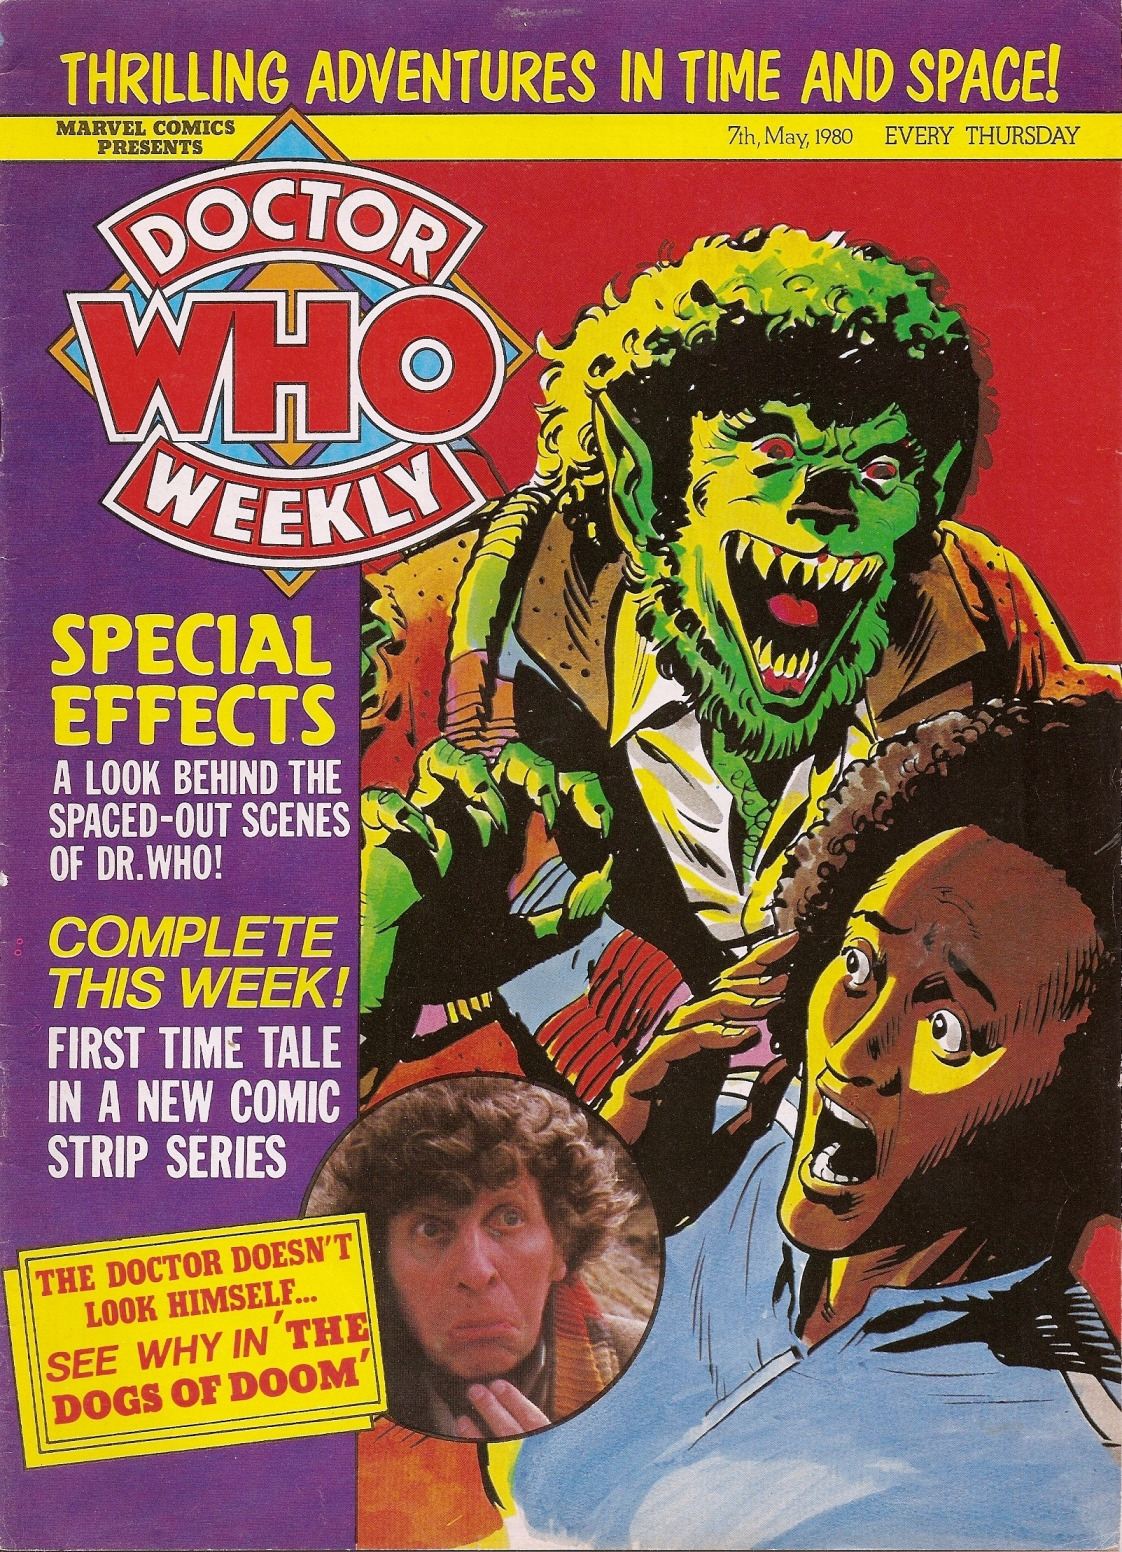 Doctor Who Weekly - Issue 30 - 7th May 1980